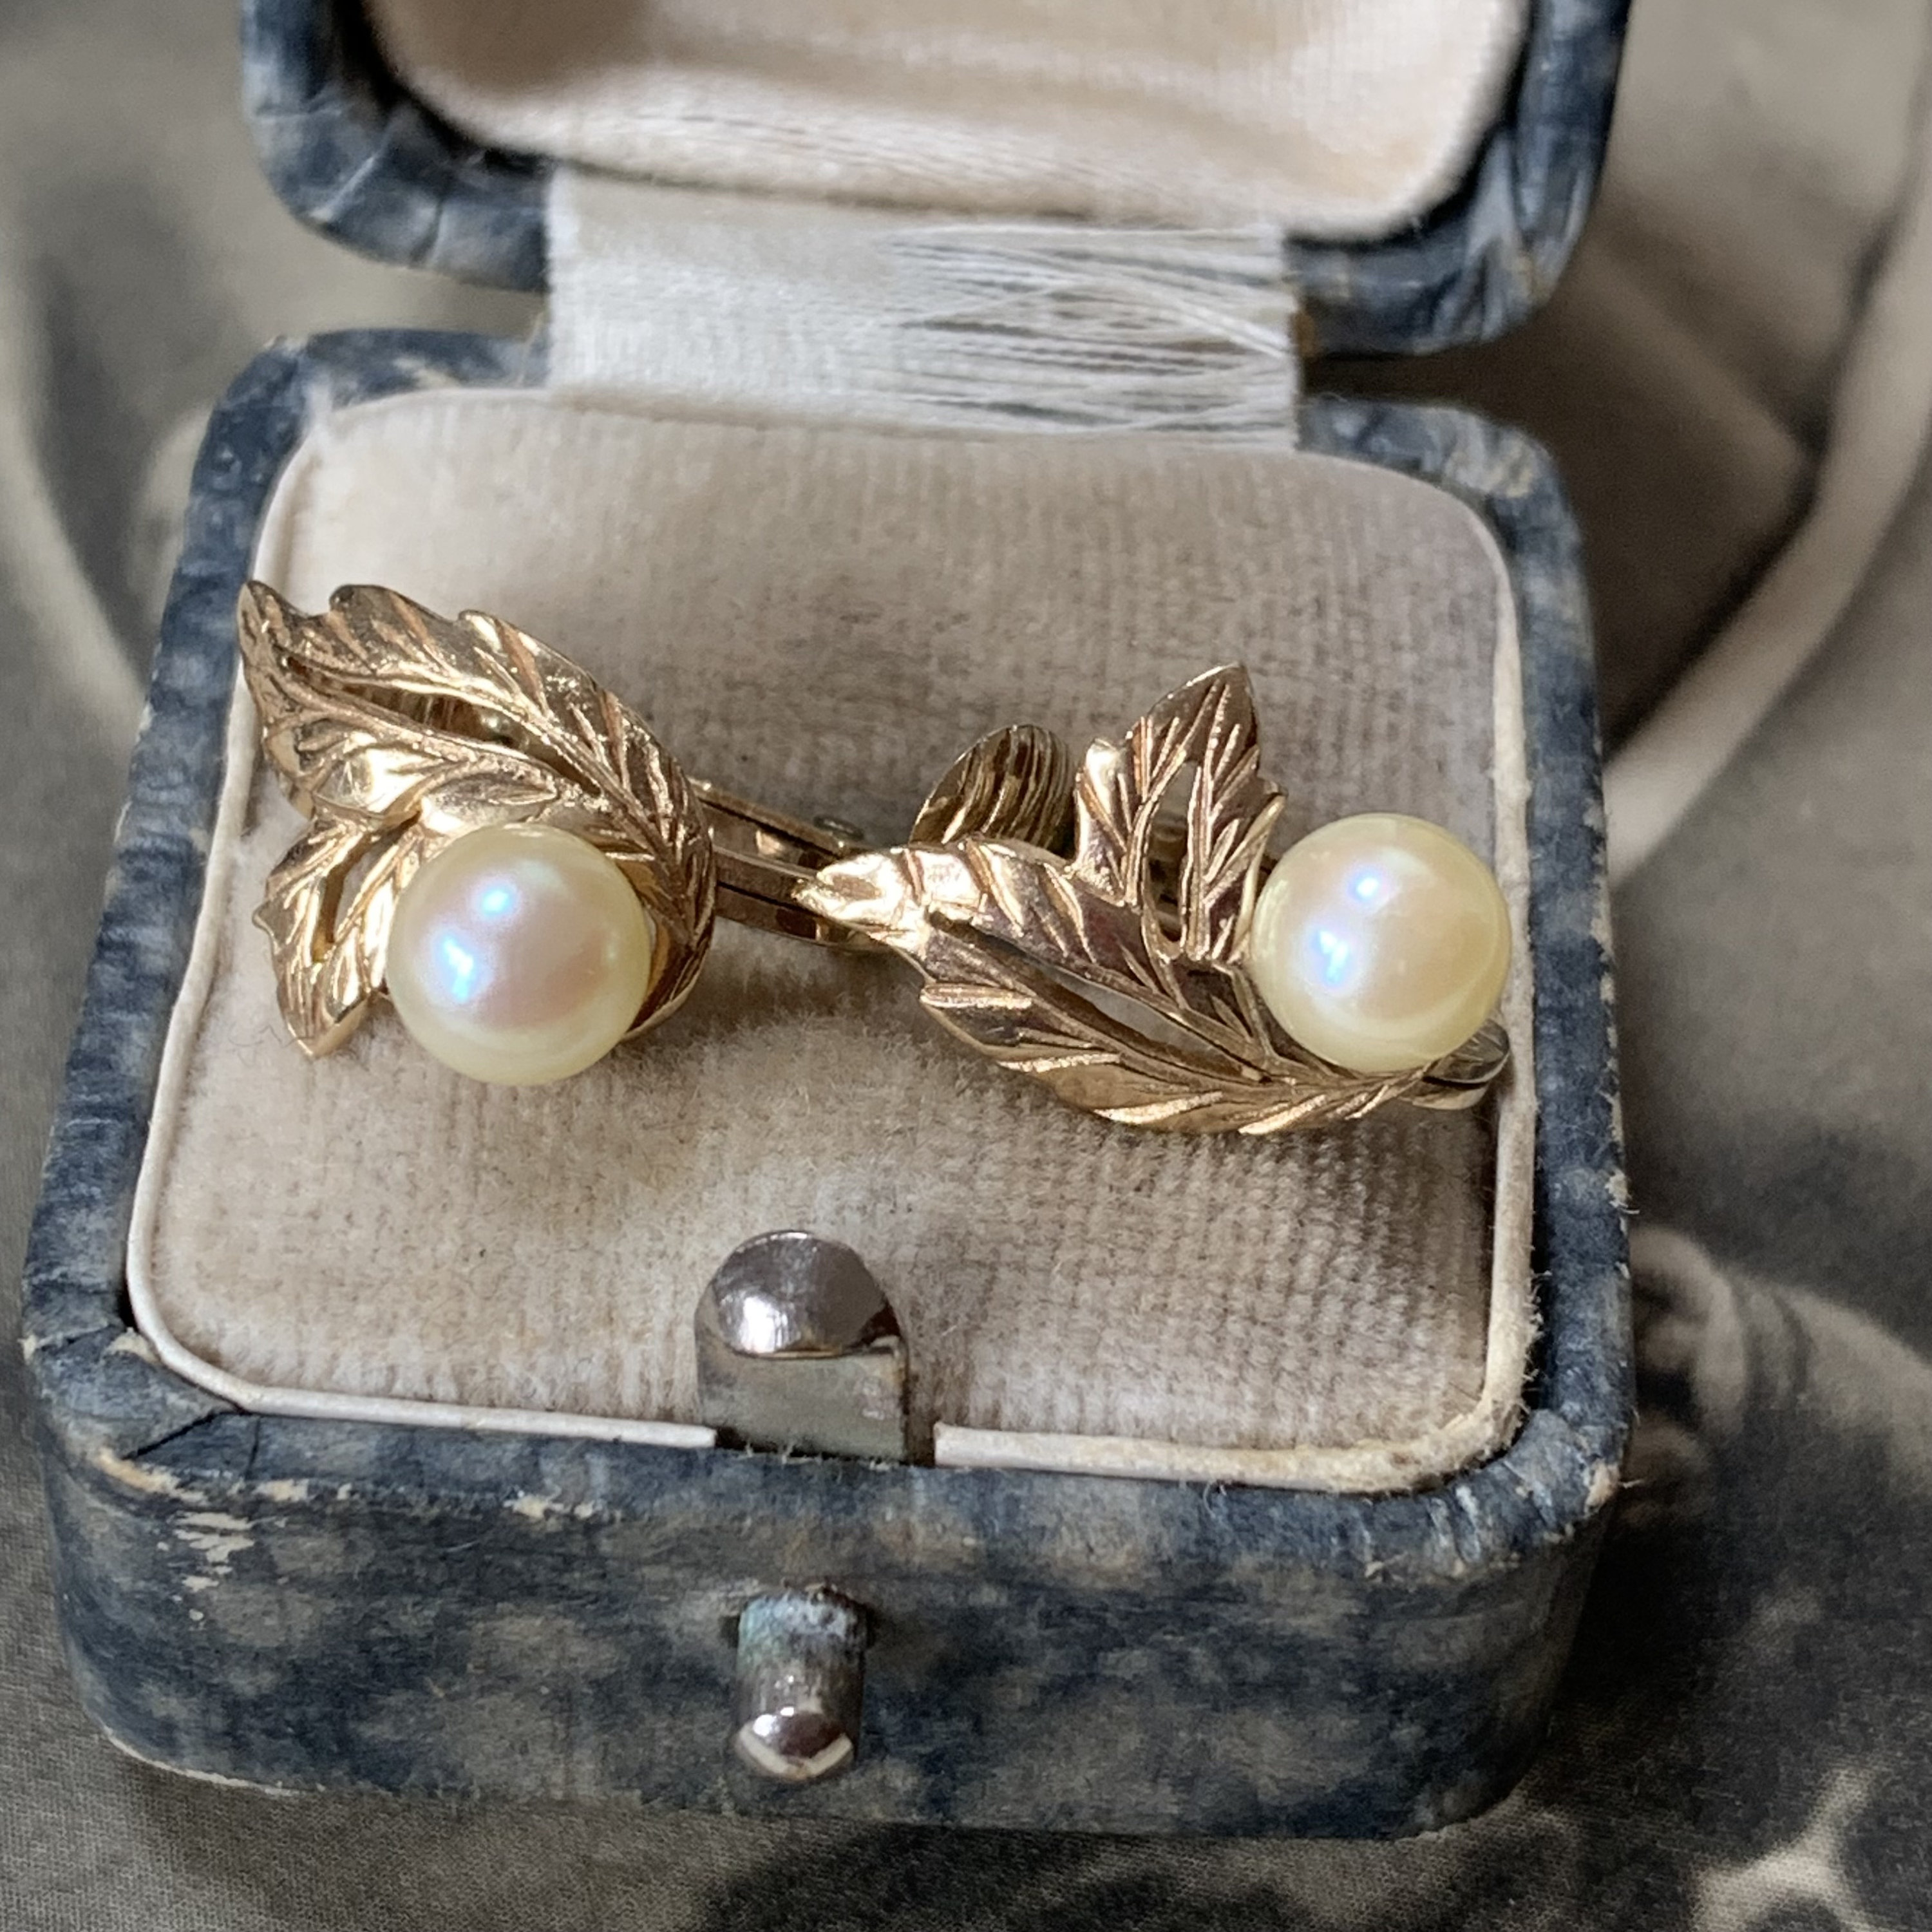 Gold Mikimoto Pearl Clip On Earrings Are A Stunning Example Of Timeless Elegance. Beautiful Design With Full London Hallmark From 1978